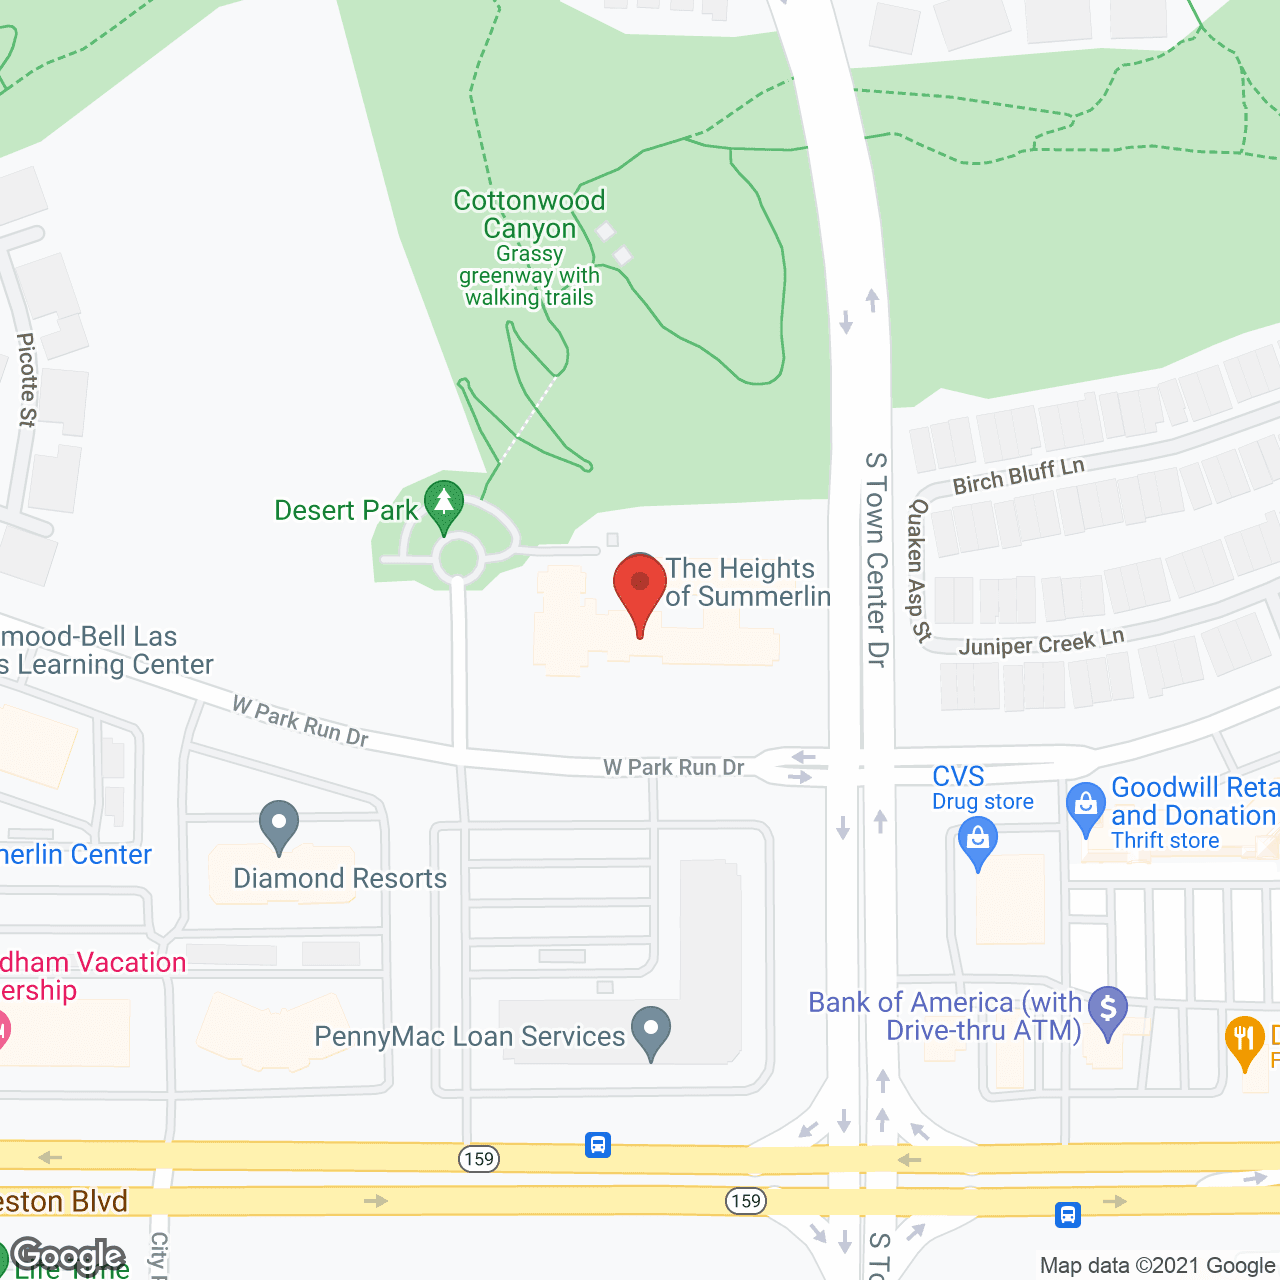 Heights Of Summerlin in google map